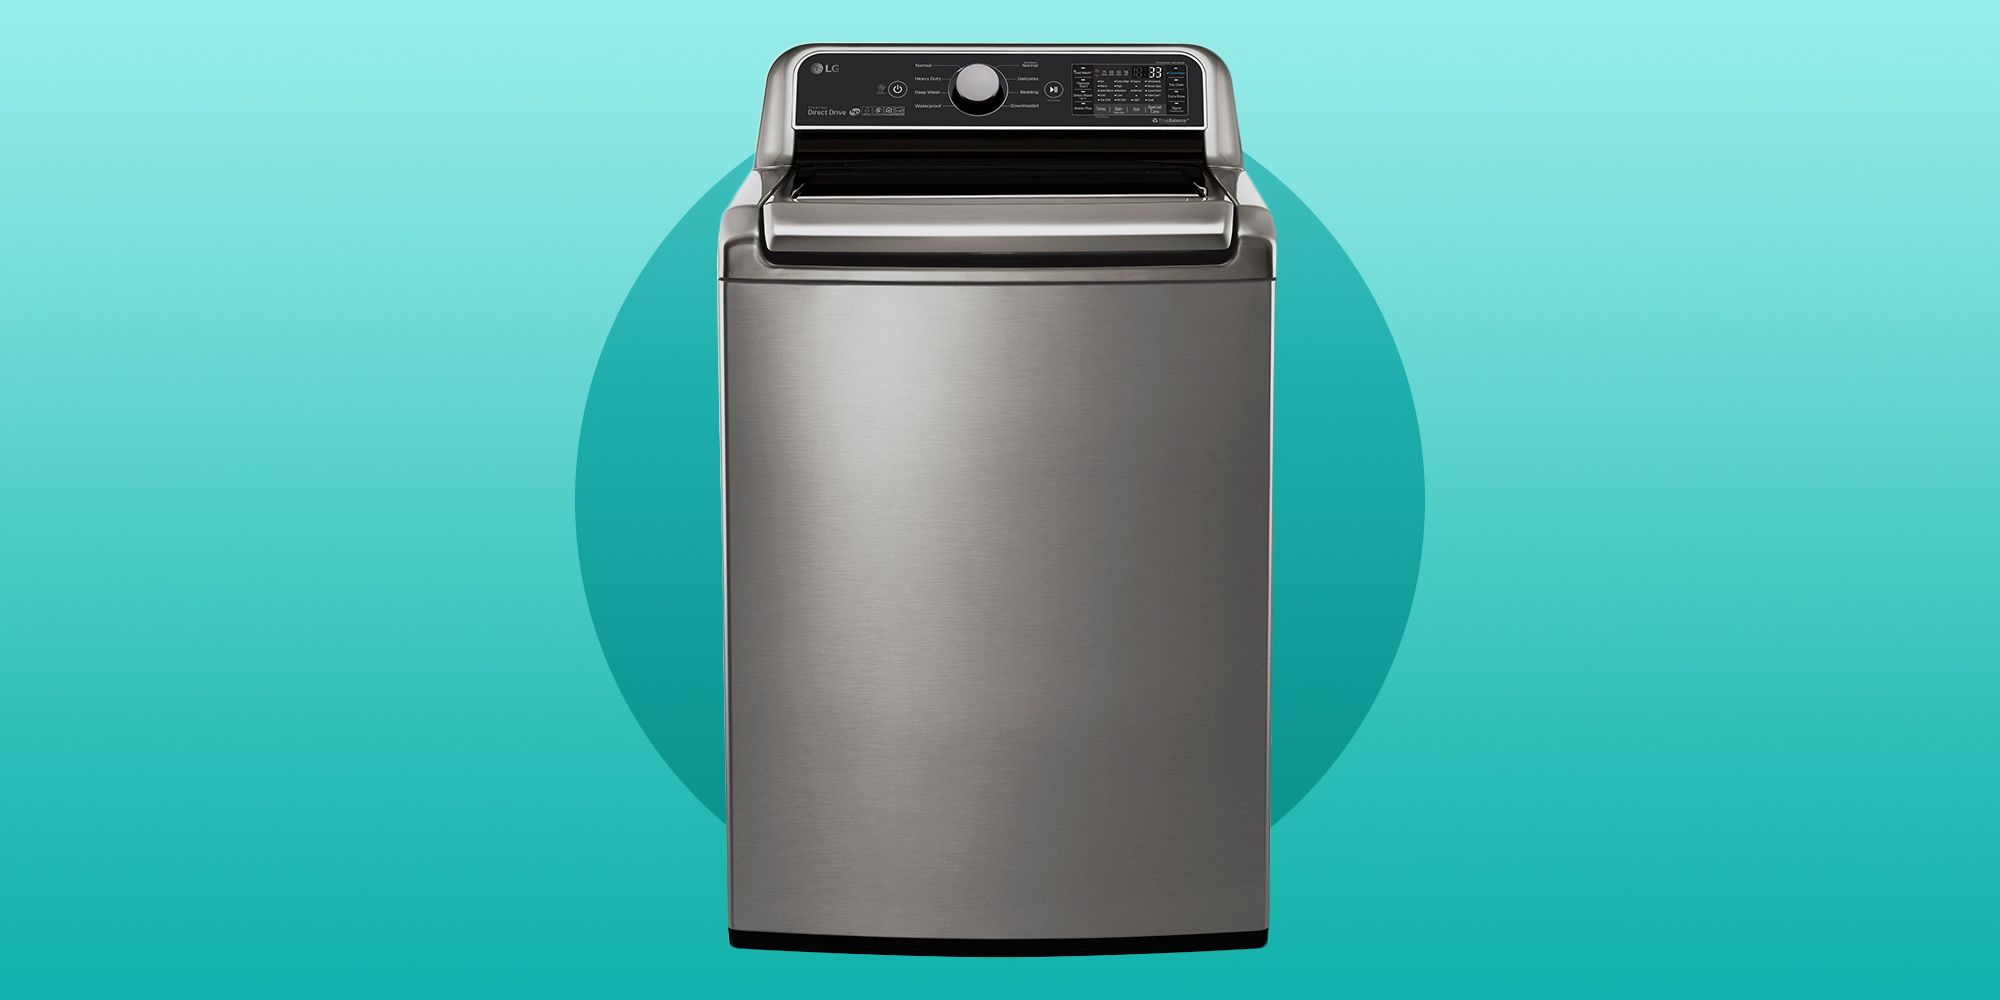 7 Best Top Load Washing Machines to Buy in 2023 - Top Load Washer Reviews